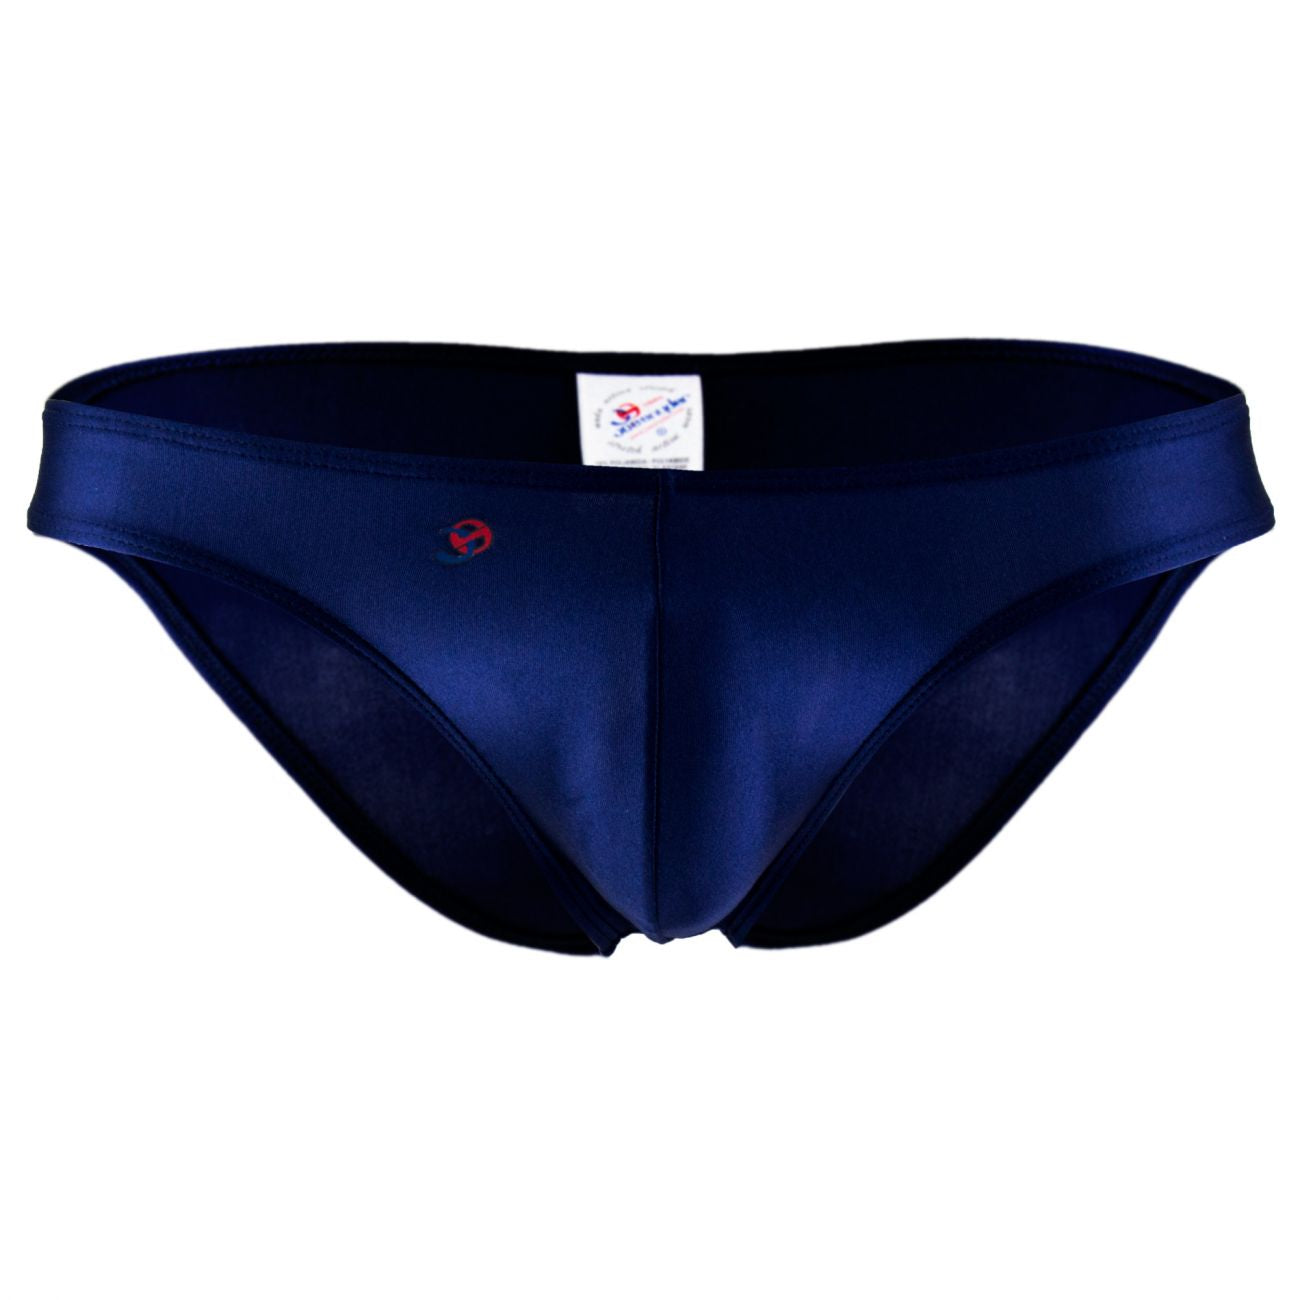 SALE - Joe Snyder Mens Polyester Thong Mexican